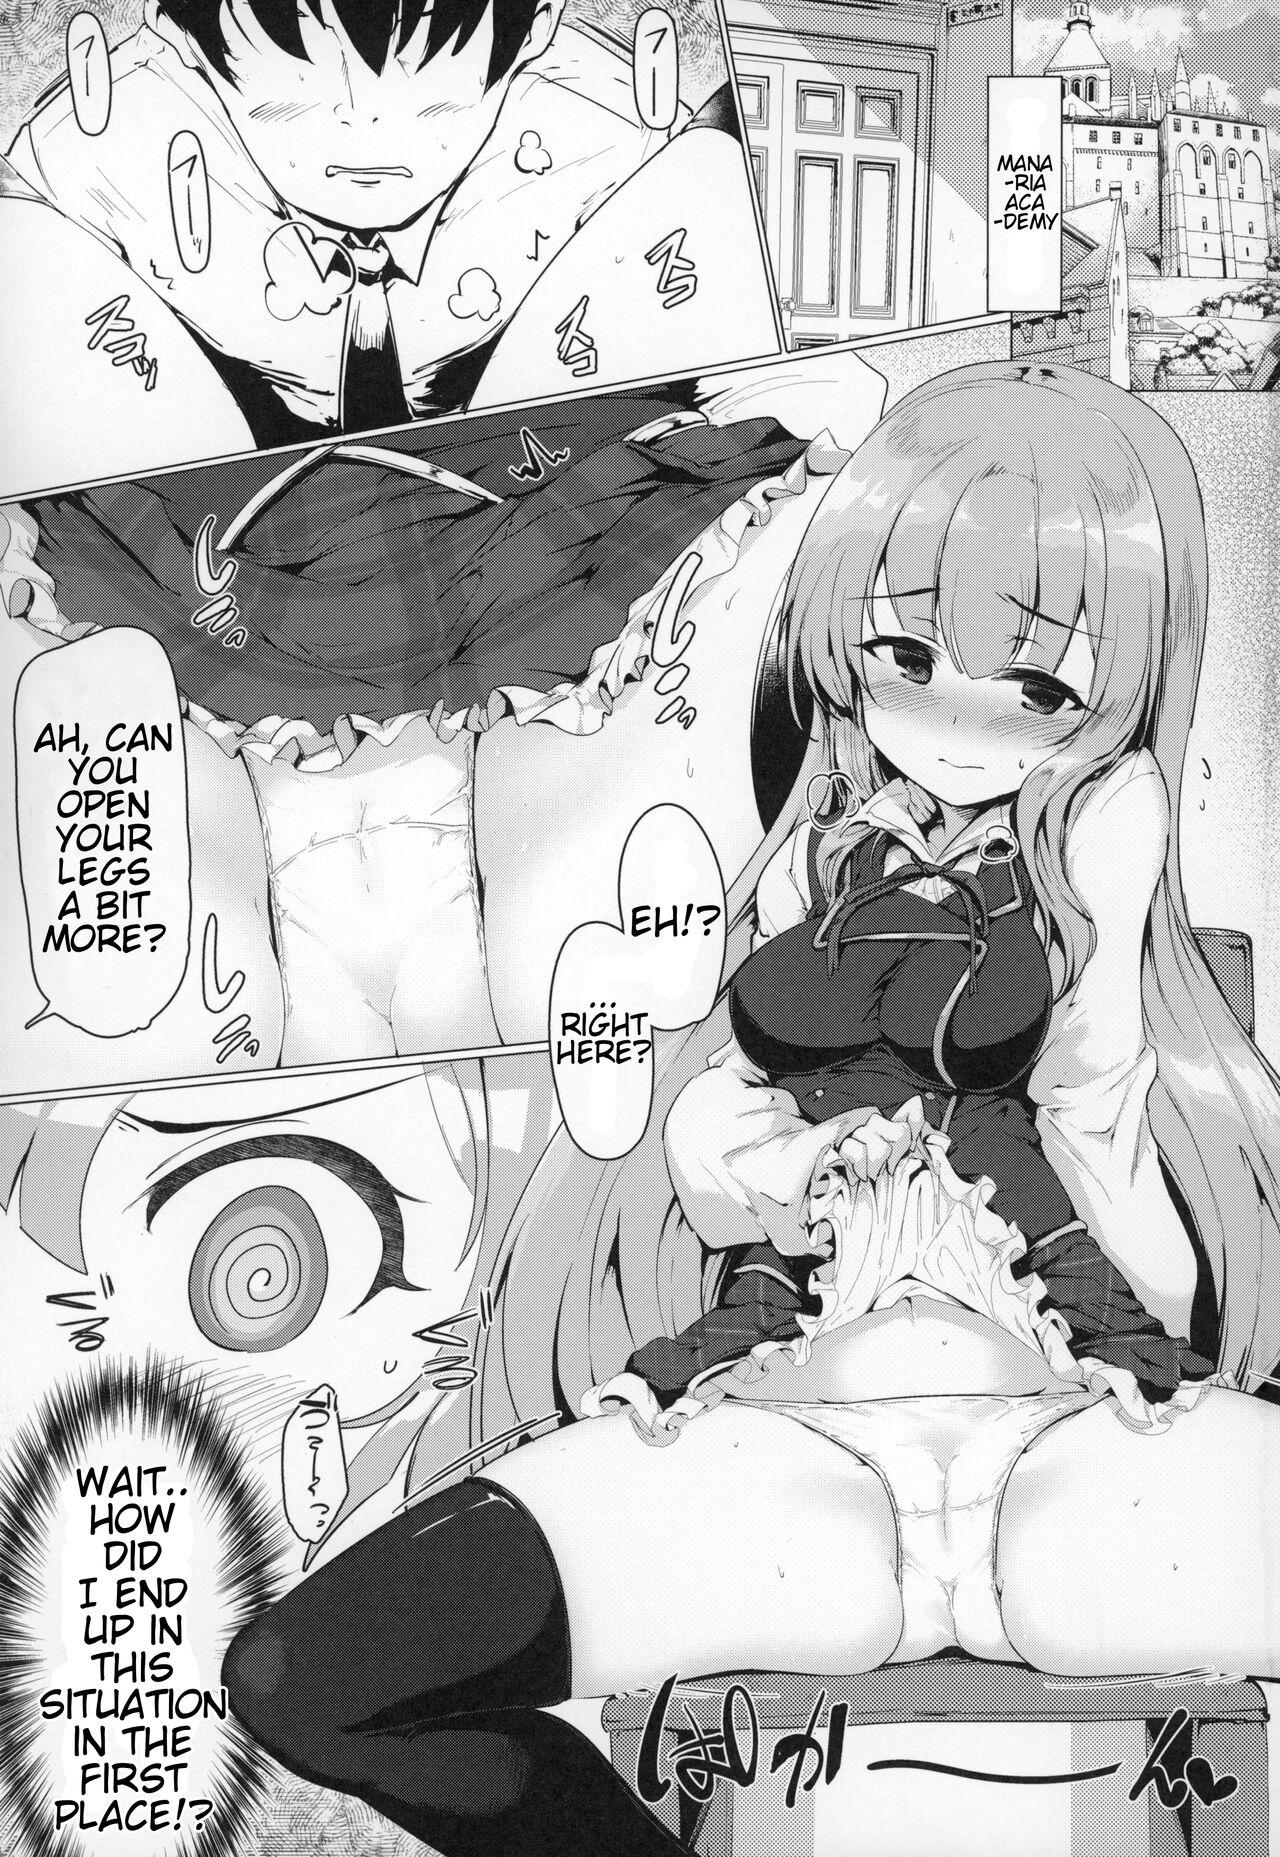 Youporn There's No Way An Ecchi Event Will Happen Between Me and the Princess of Manaria Kingdom! - Manaria friends Cocksucker - Page 4